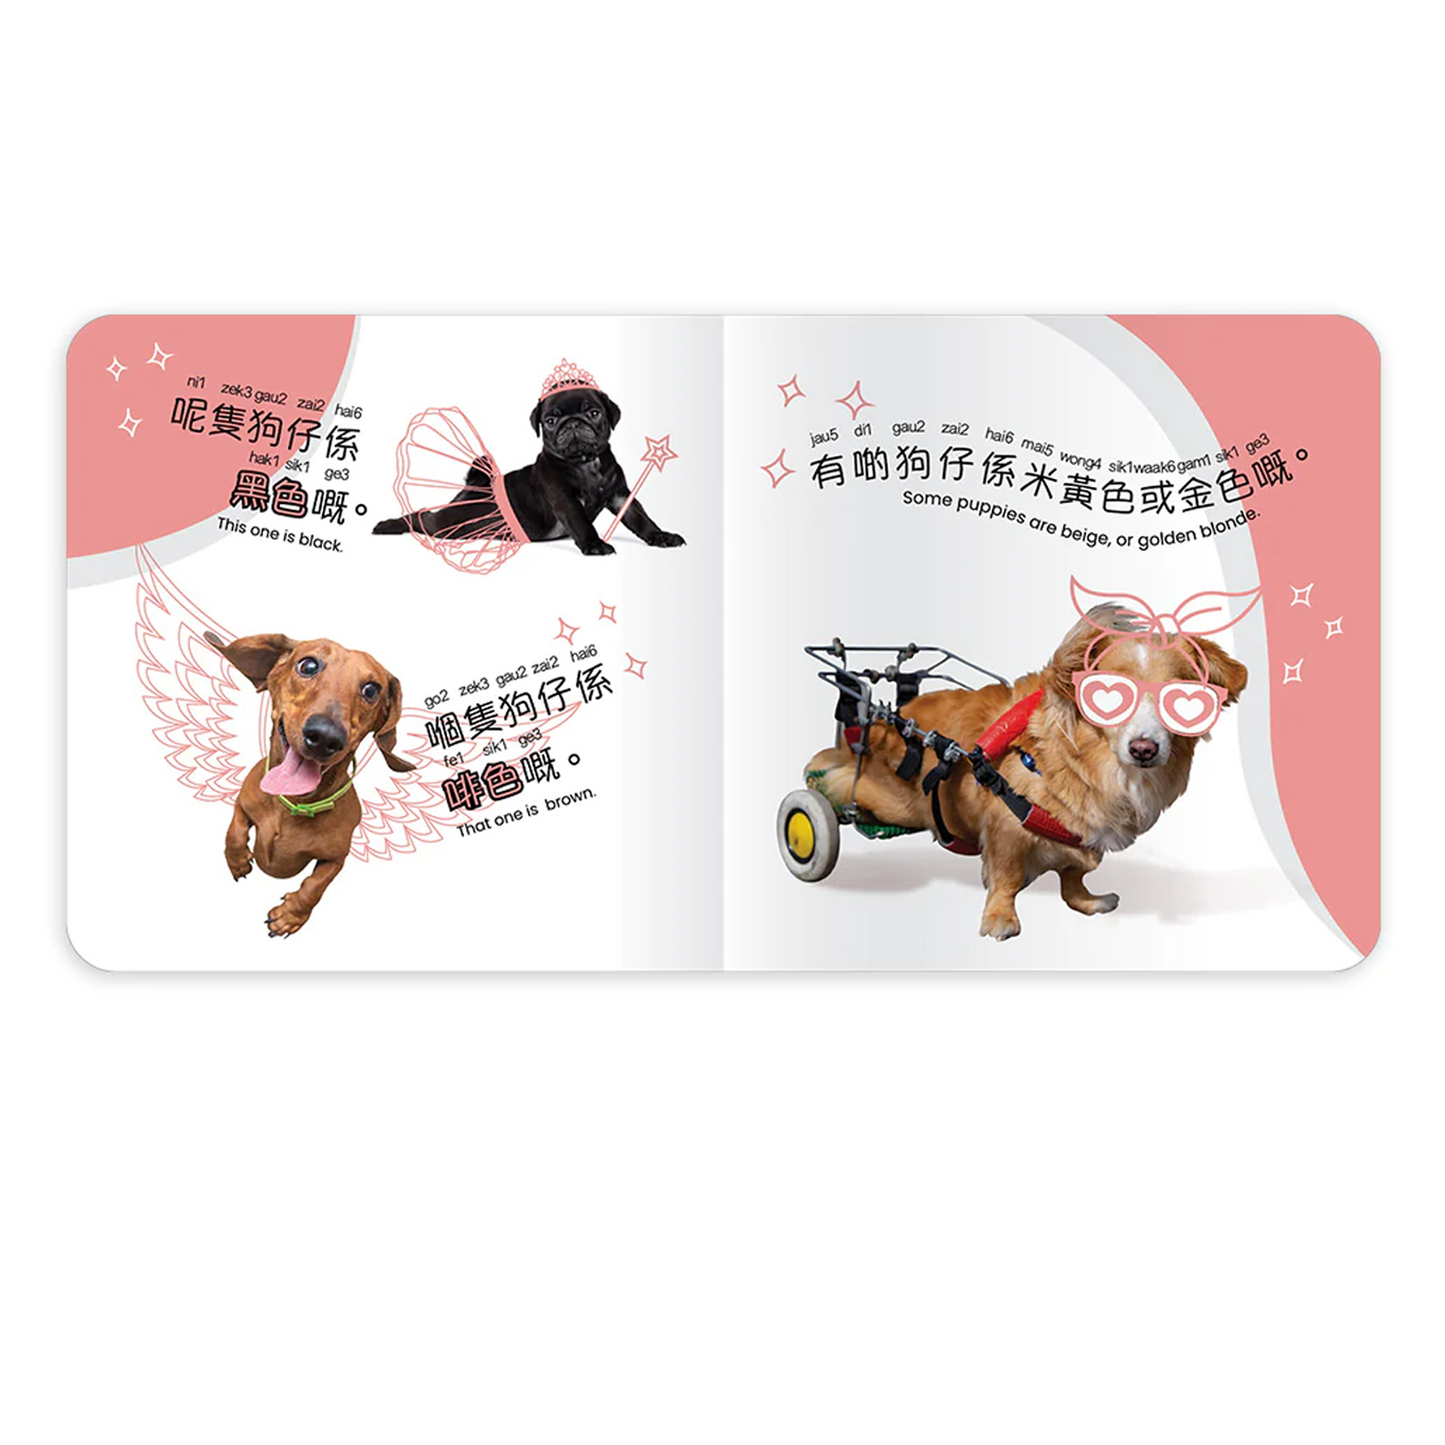 All Puppies Are Good Puppies: 所有嘅狗仔都係乖狗仔 (Cantonese)